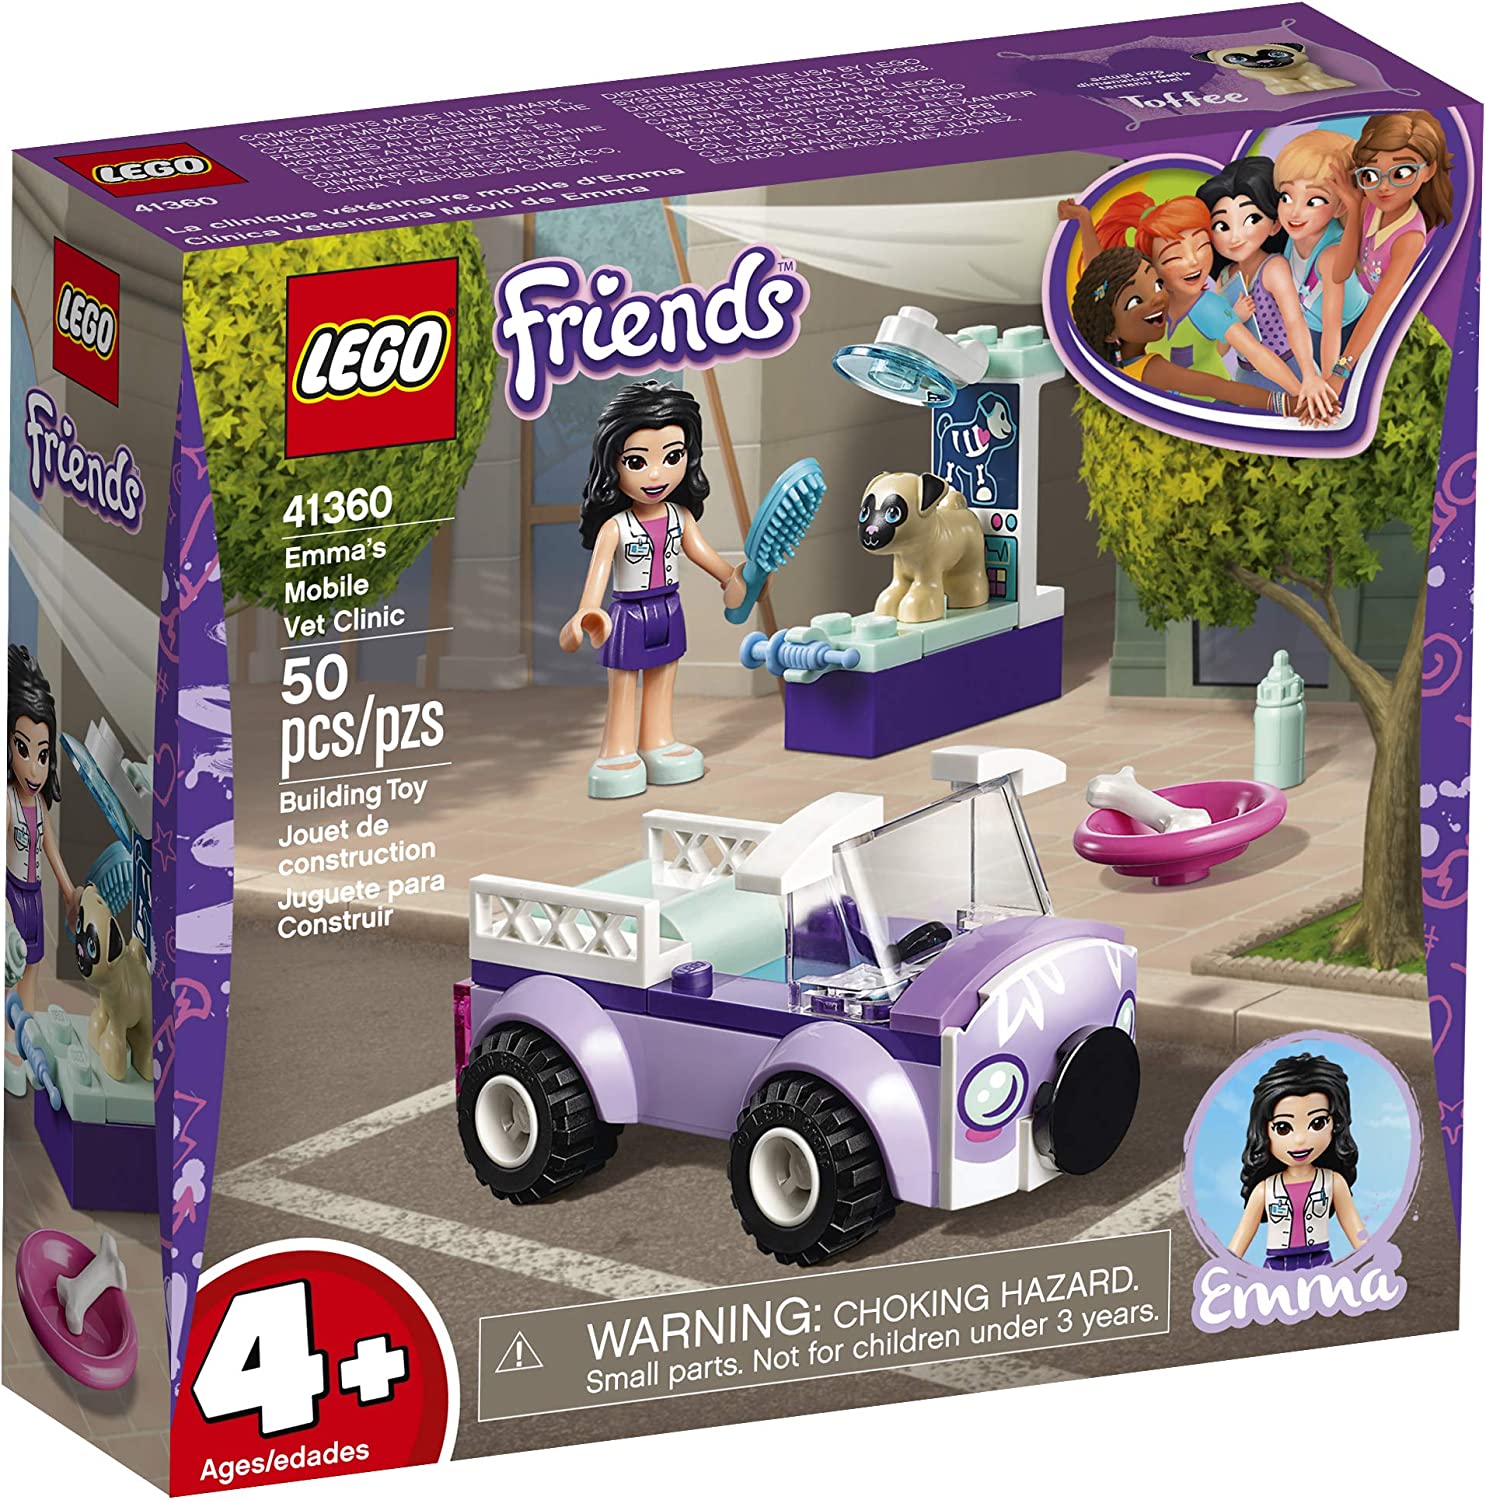 LEGO Friends Emma's Mobile Vet Clinic 41360 Toy Animal Clinic - image 5 of 7